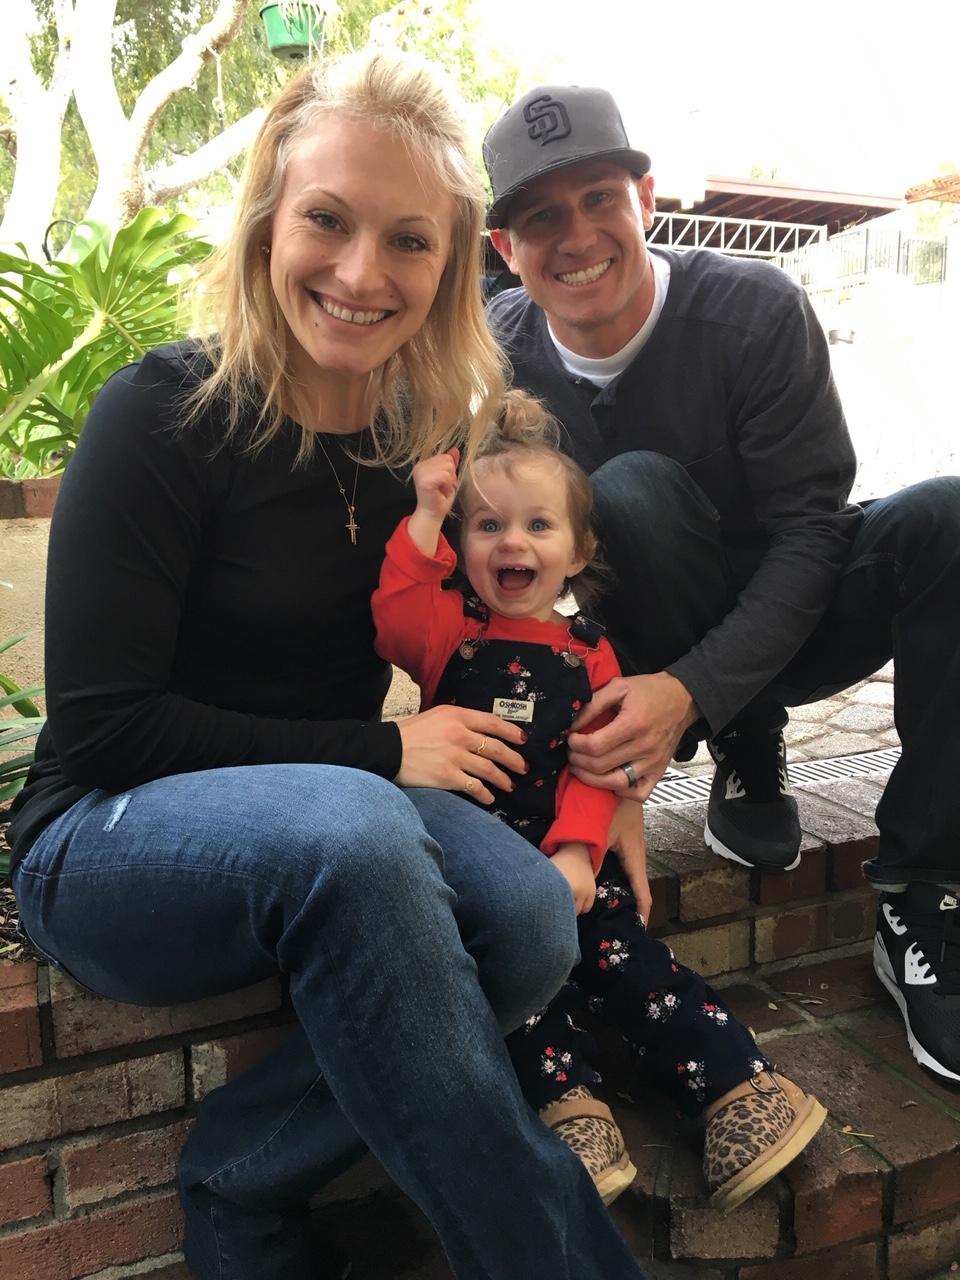 Ashley, Cory, and their daughter Evie Iverson. (Photo courtesy of <a href="https://iversonfaa.org/">Ashley Iverson</a>)